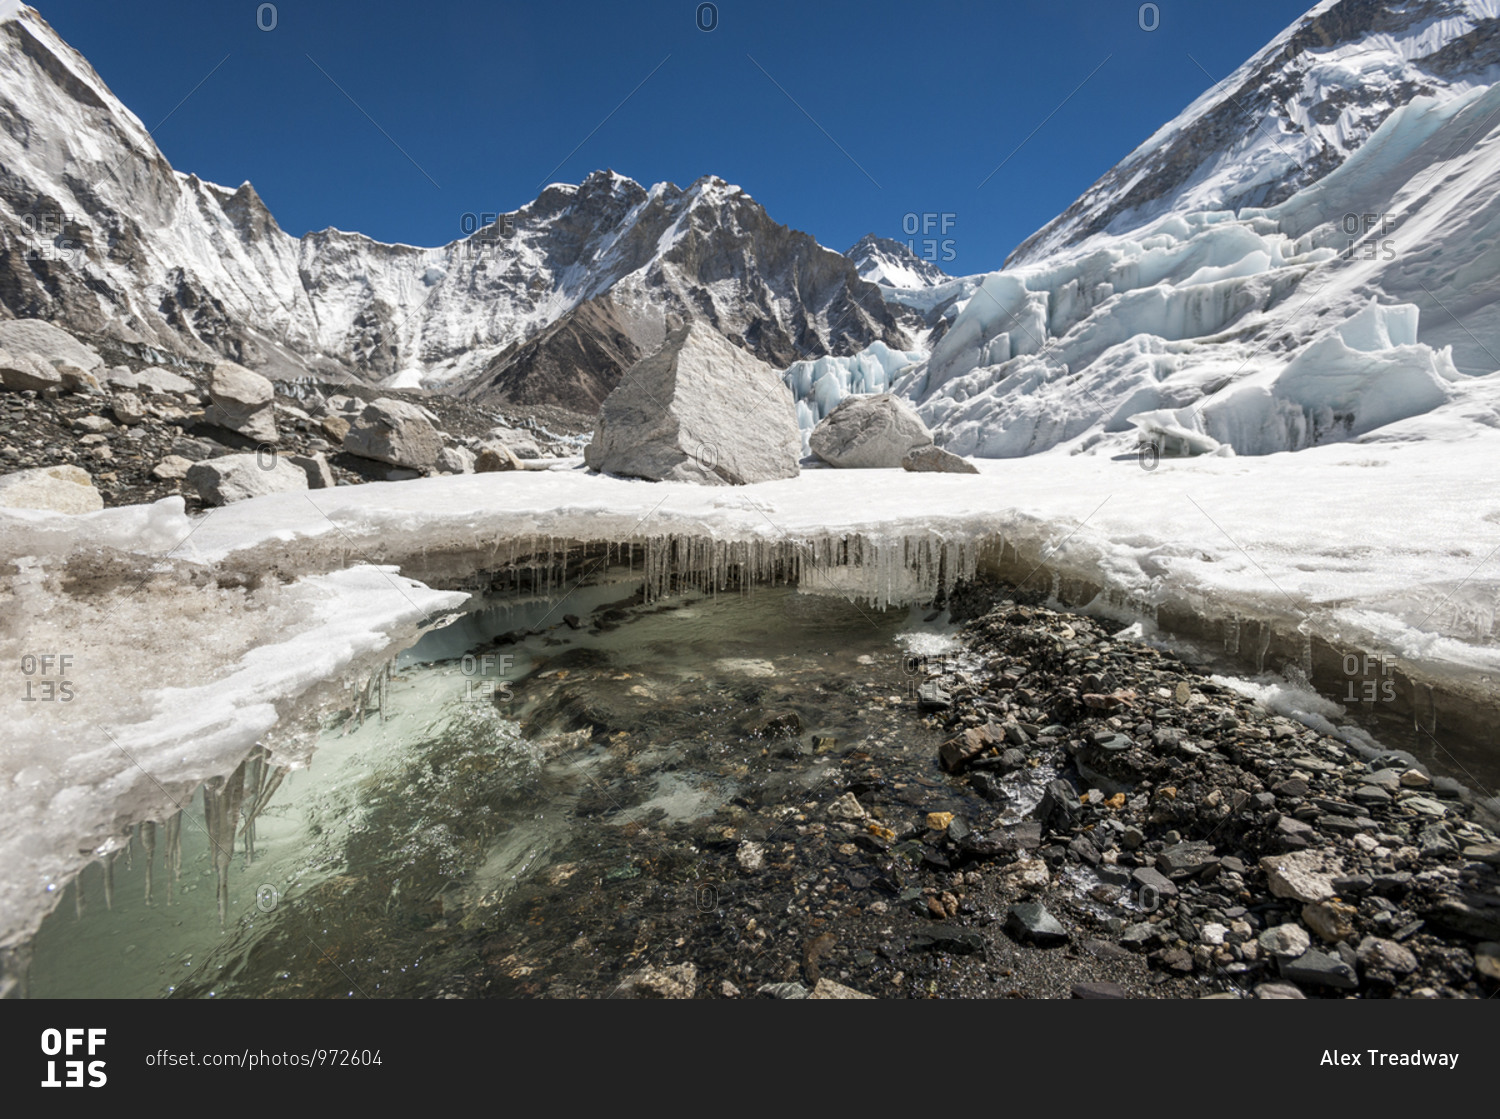 Glacial melt water forms under the Khumbu glacier as the ice melts